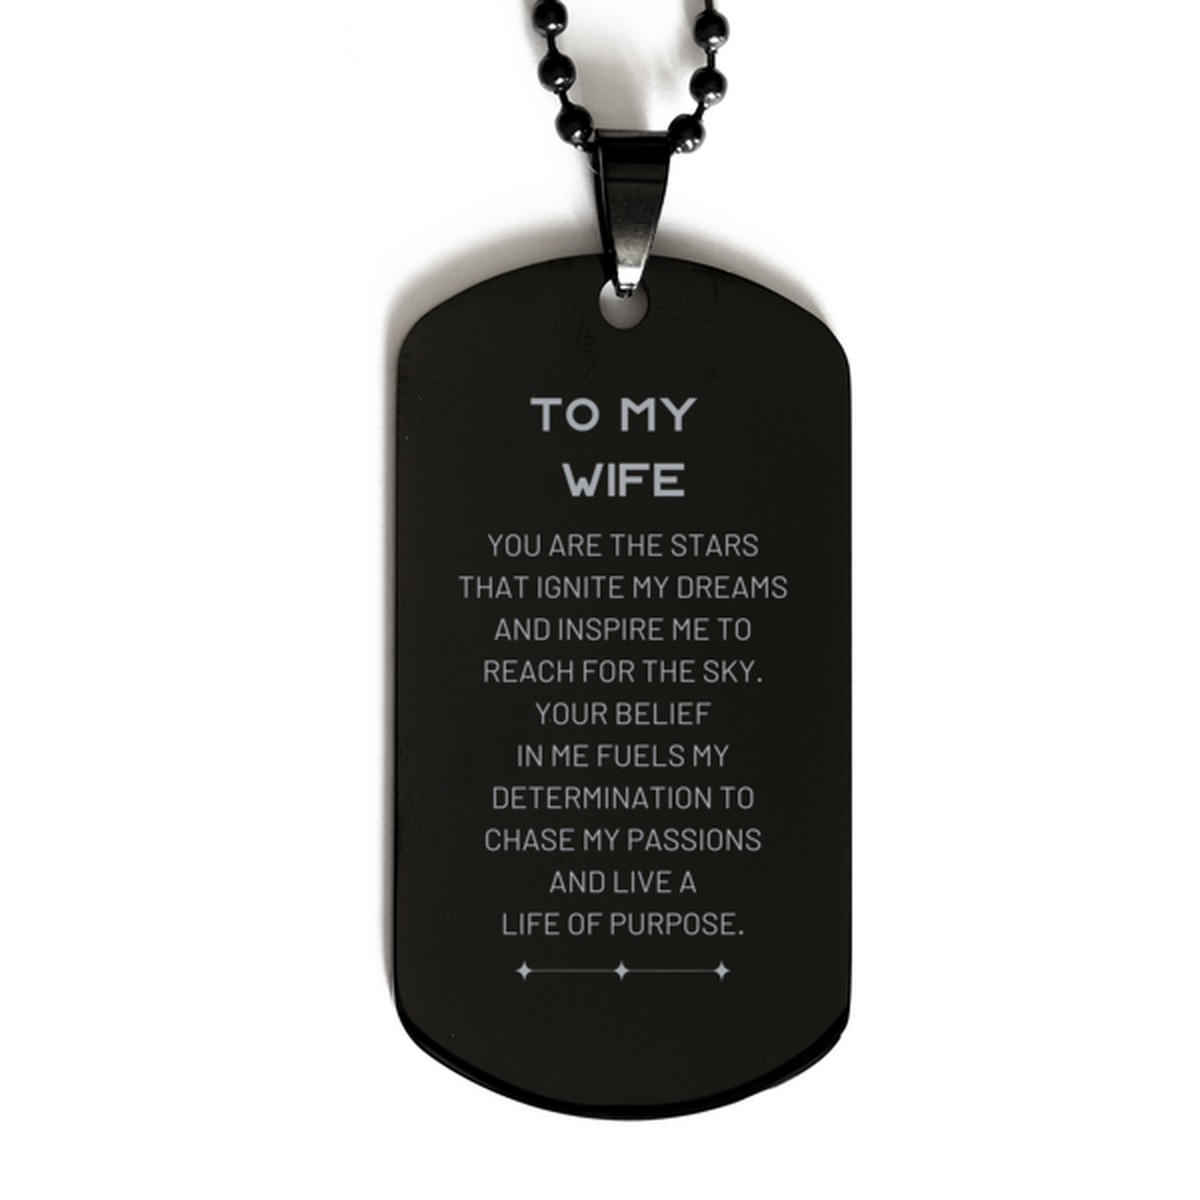 To My Wife Black Dog Tag, You are the stars that ignite my dreams and inspire me to reach for the sky, Birthday Unique Gifts For Wife, Thank You Gifts For Wife